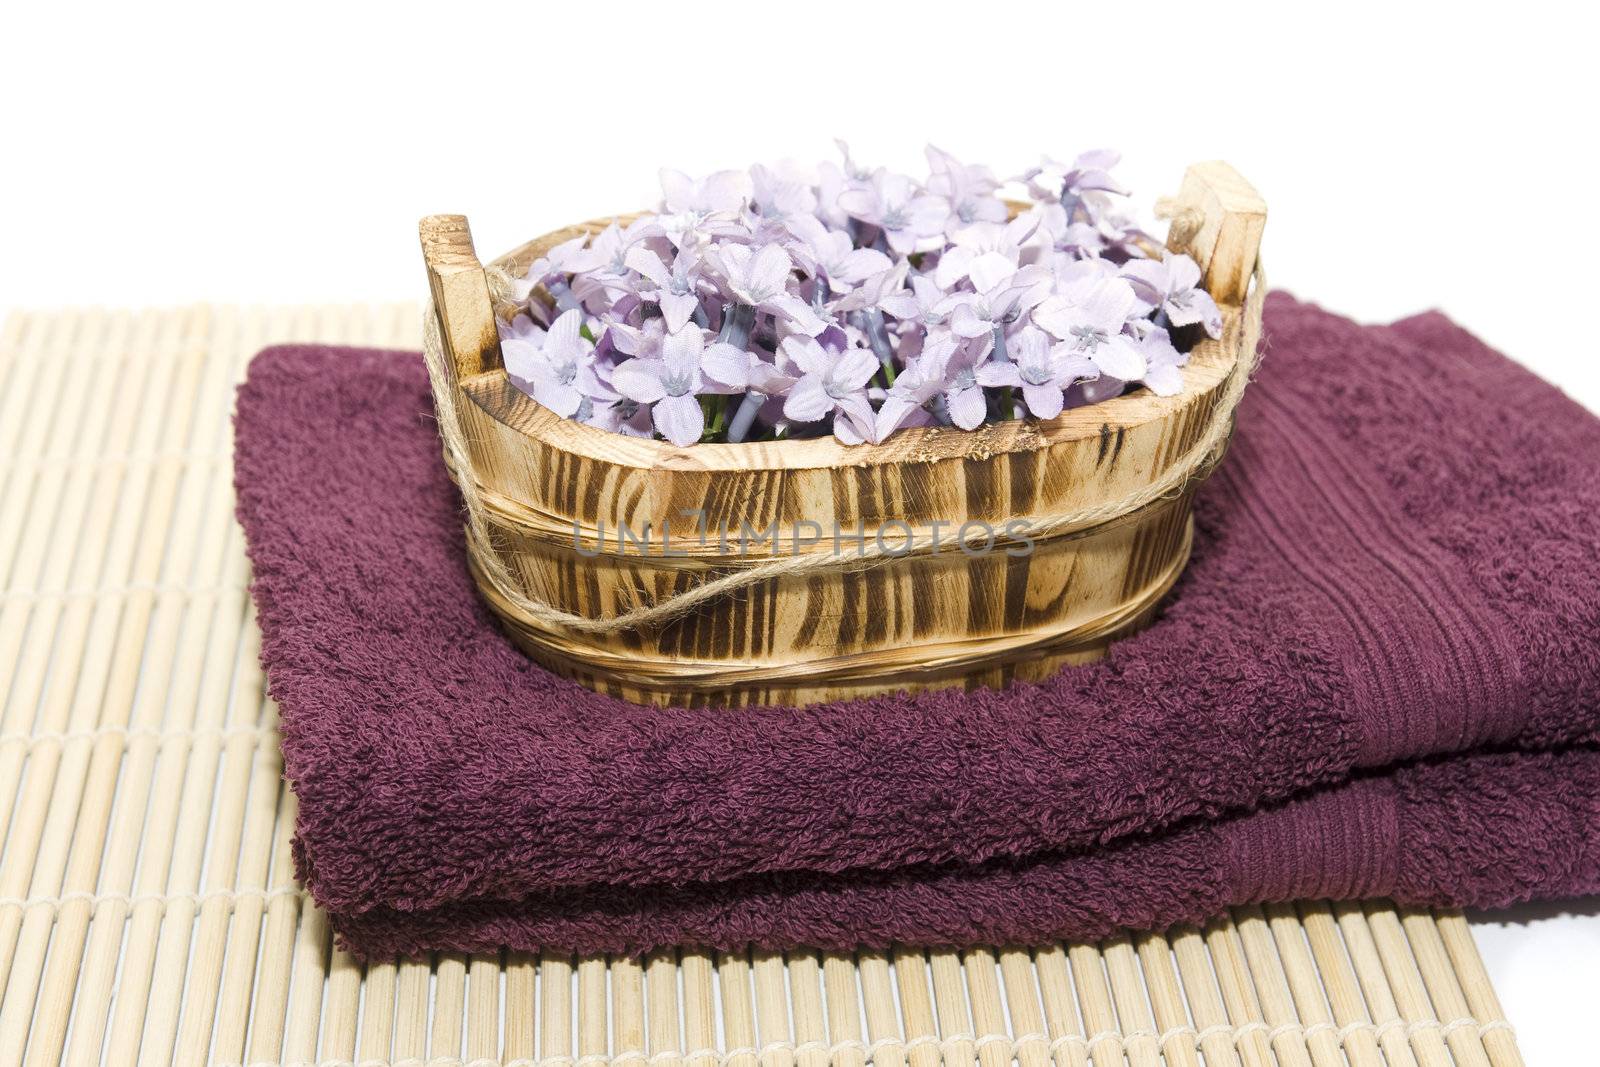 Scented soap flowers in a basket placed on two towels. Dayspa concept.